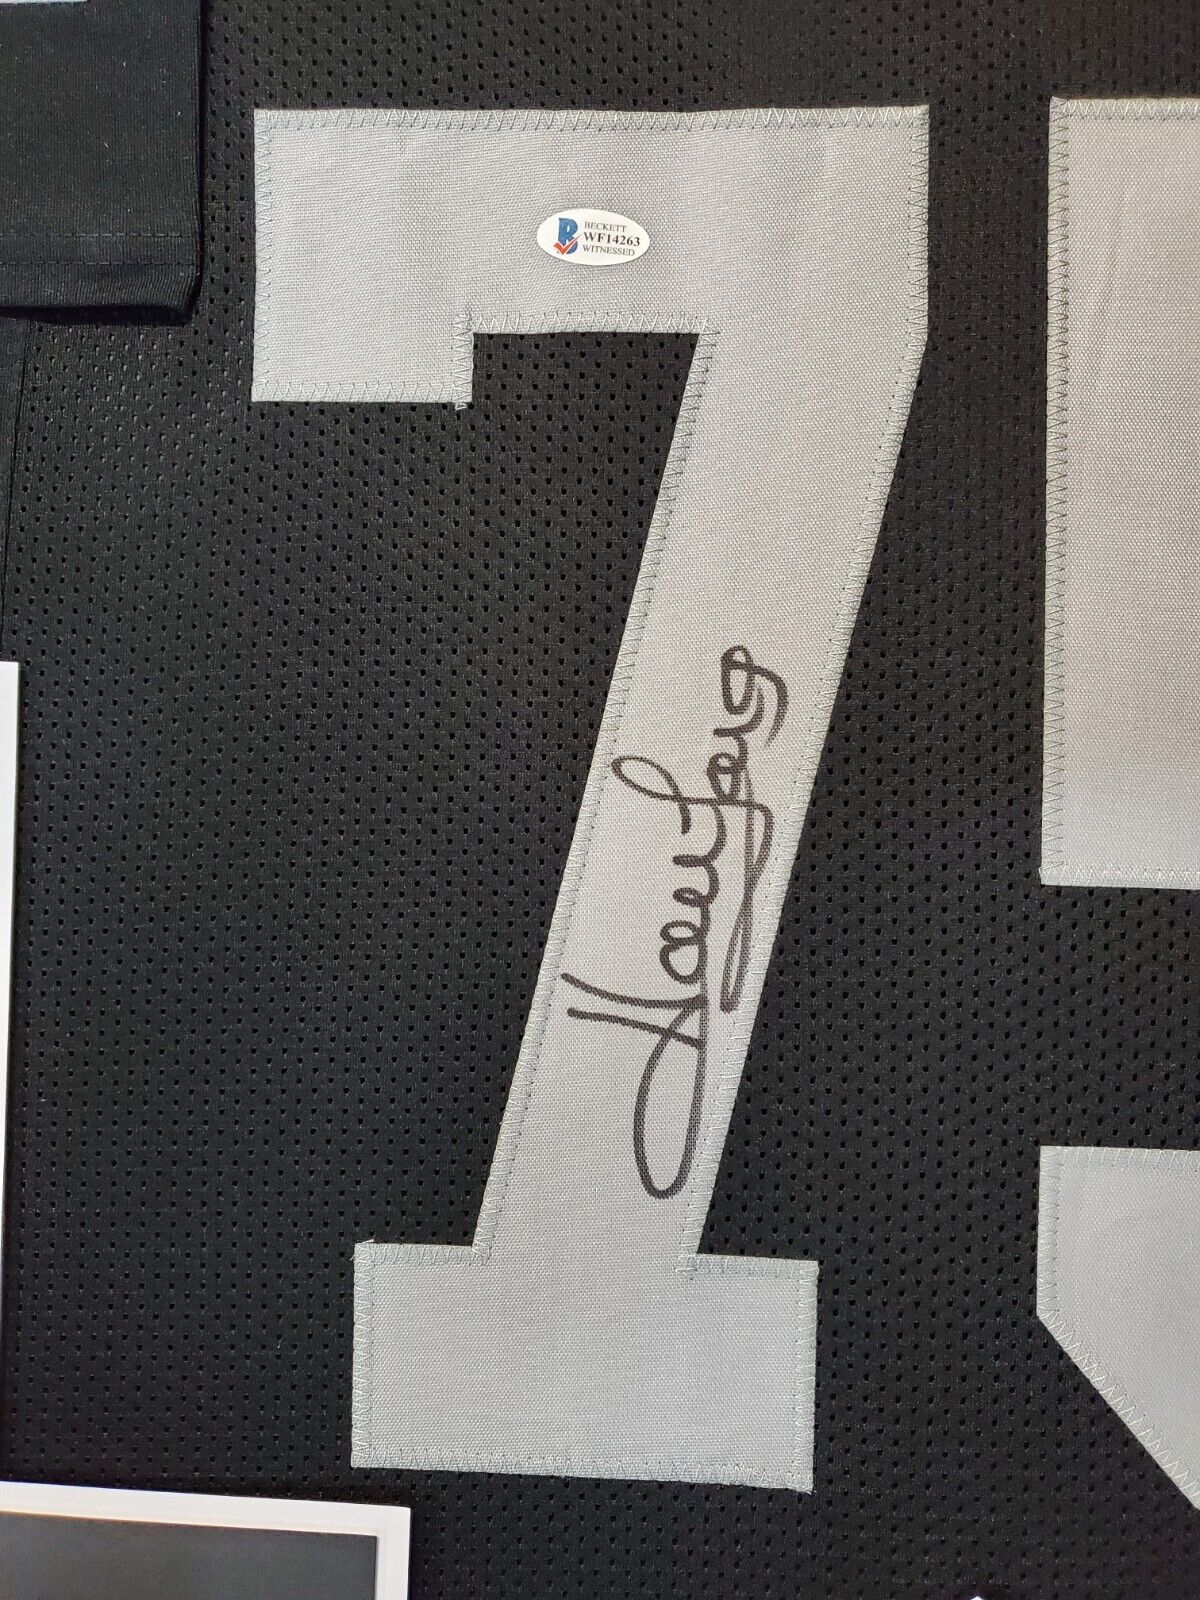 MVP Authentics Framed Oakland Raiders Howie Long Autographed Signed Jersey Beckett Coa 449.10 sports jersey framing , jersey framing